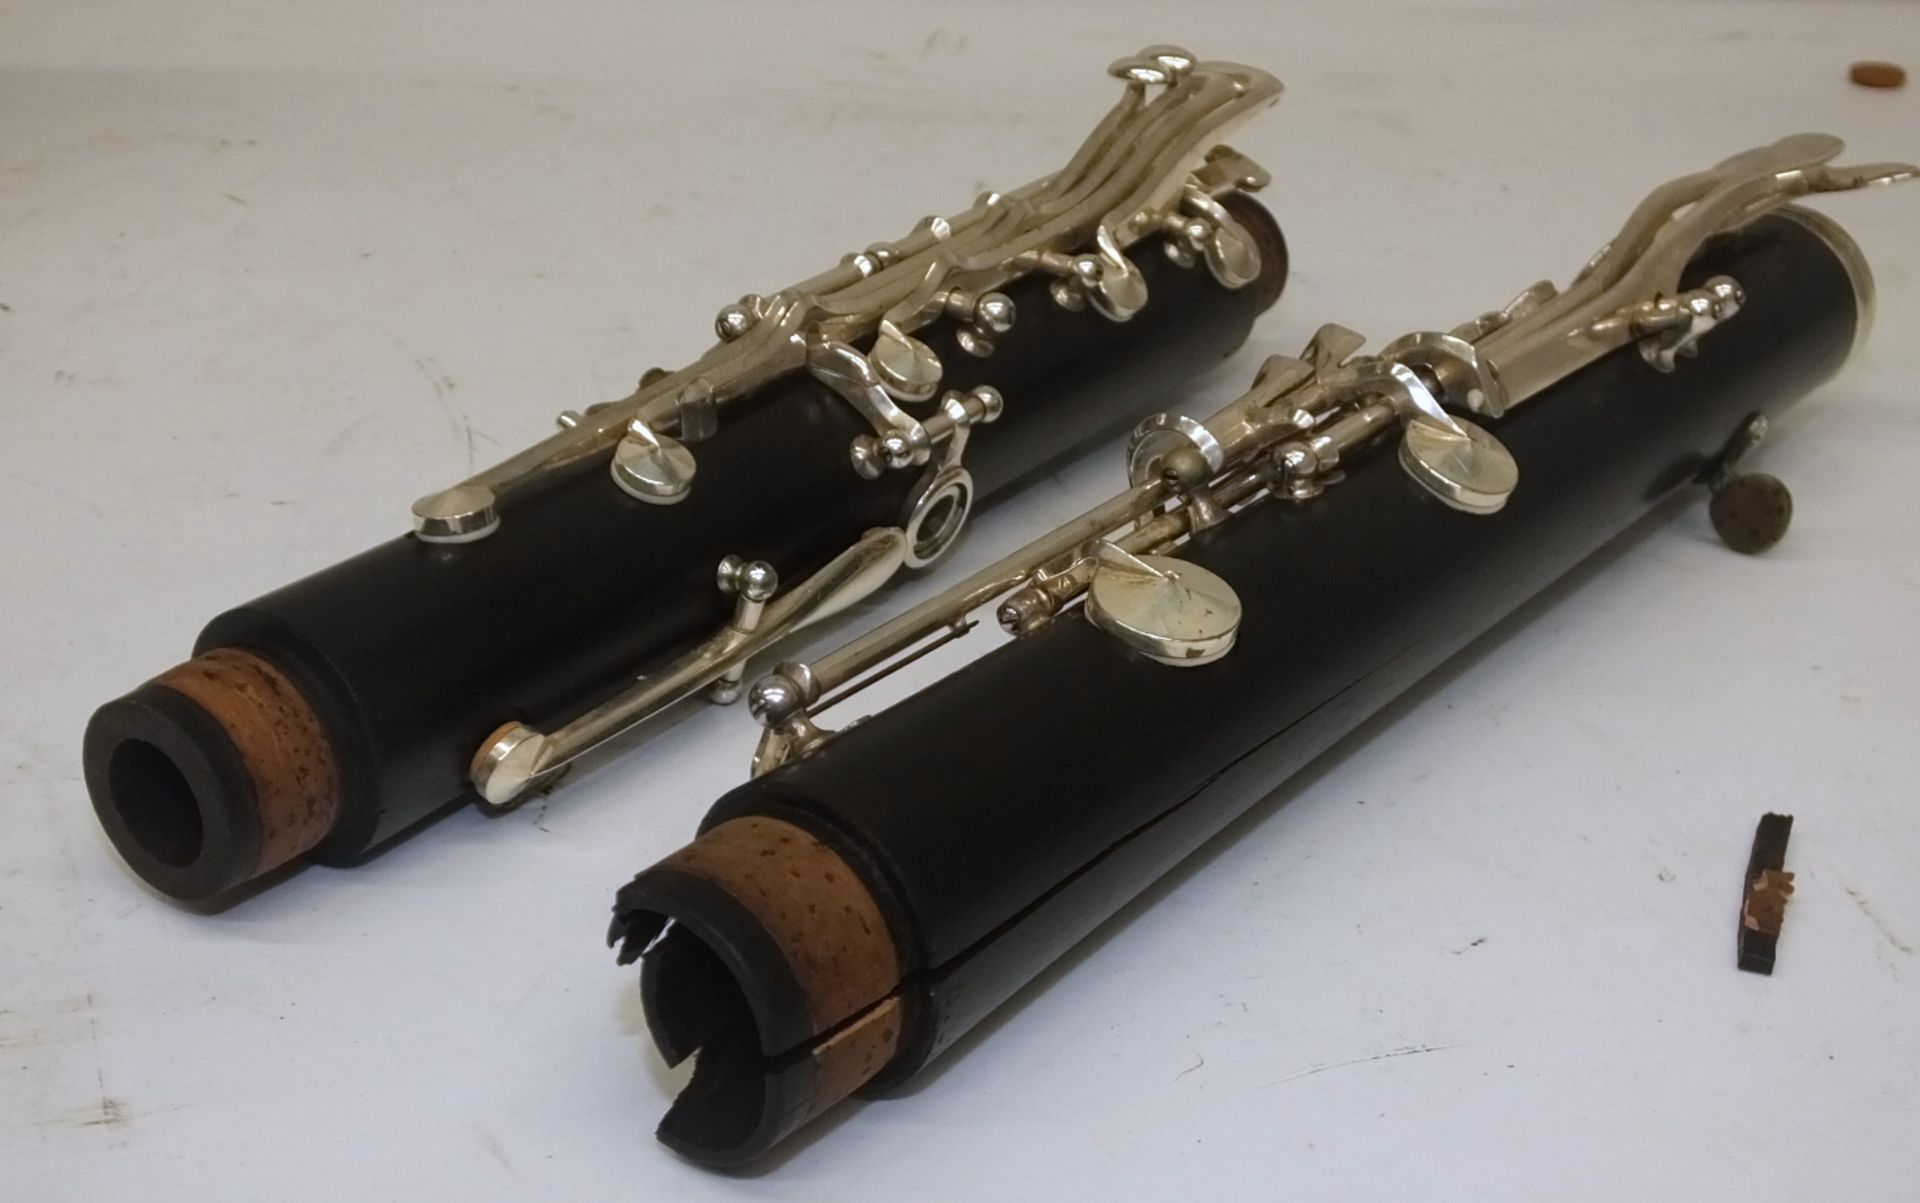 Buffet Crampon Clarinet (incomplete - damage as seen in pictures) - Serial Number - 275704 - Image 3 of 10